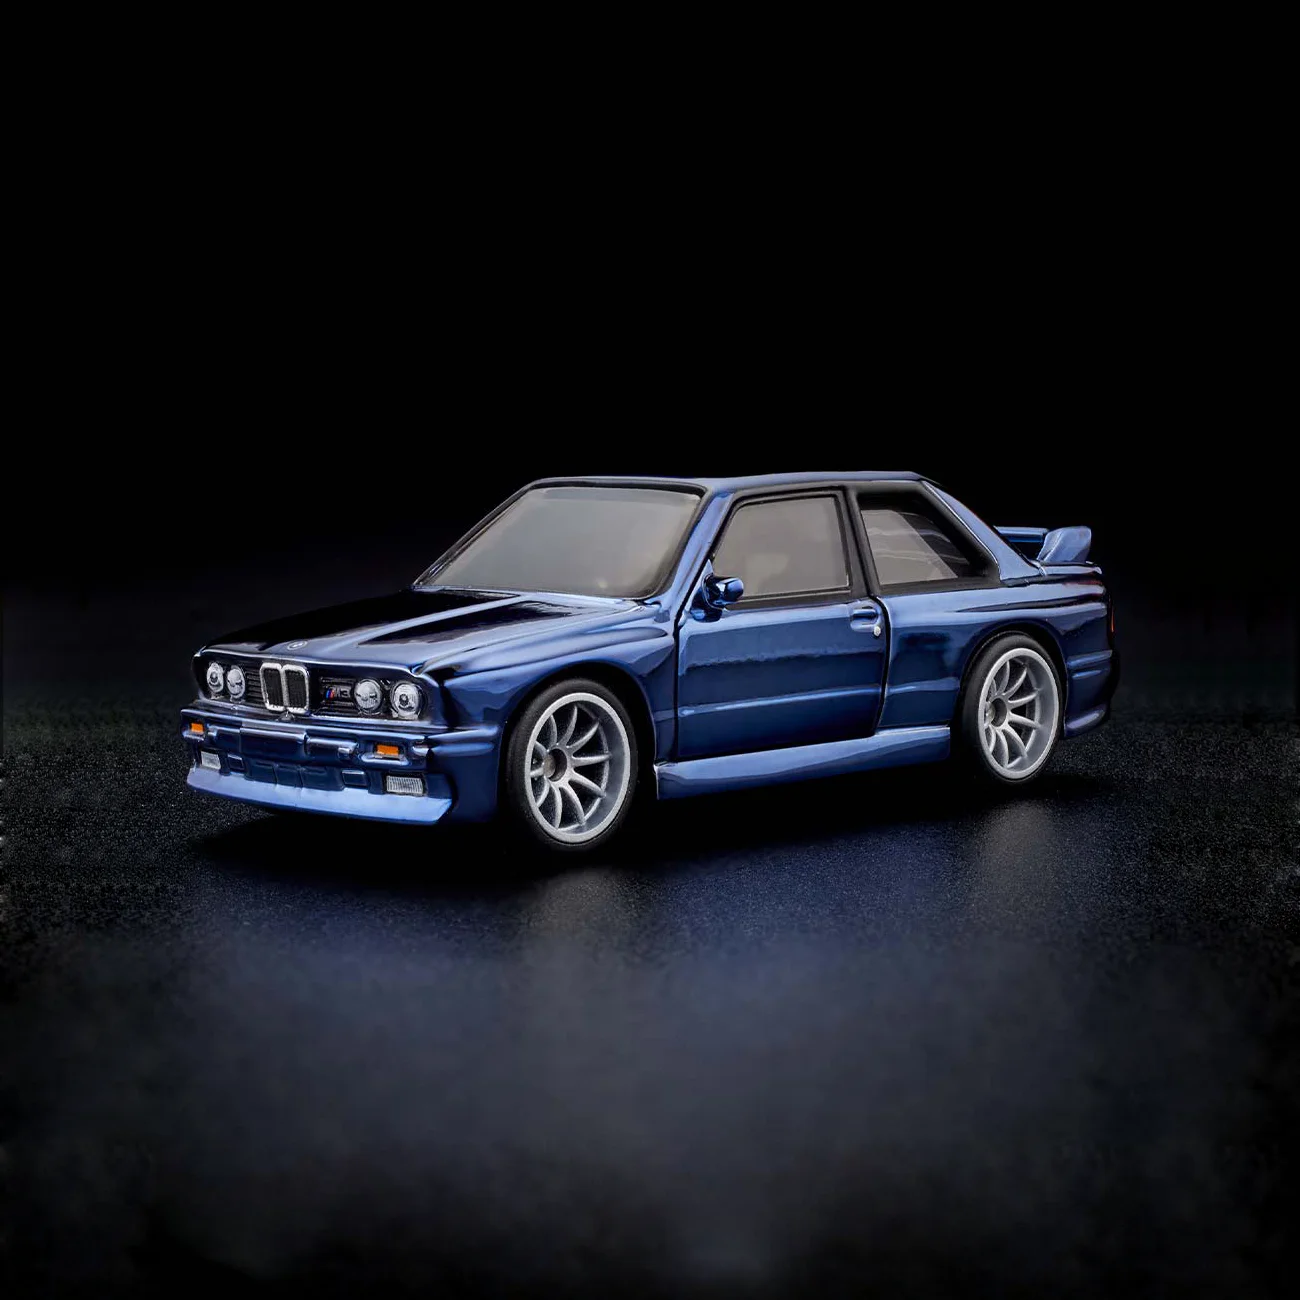 Hot Wheels 1:64 RLC BMW M3 E30 1991 Collector Edition Metal Diecast Model Race Car Kids Toys Gift